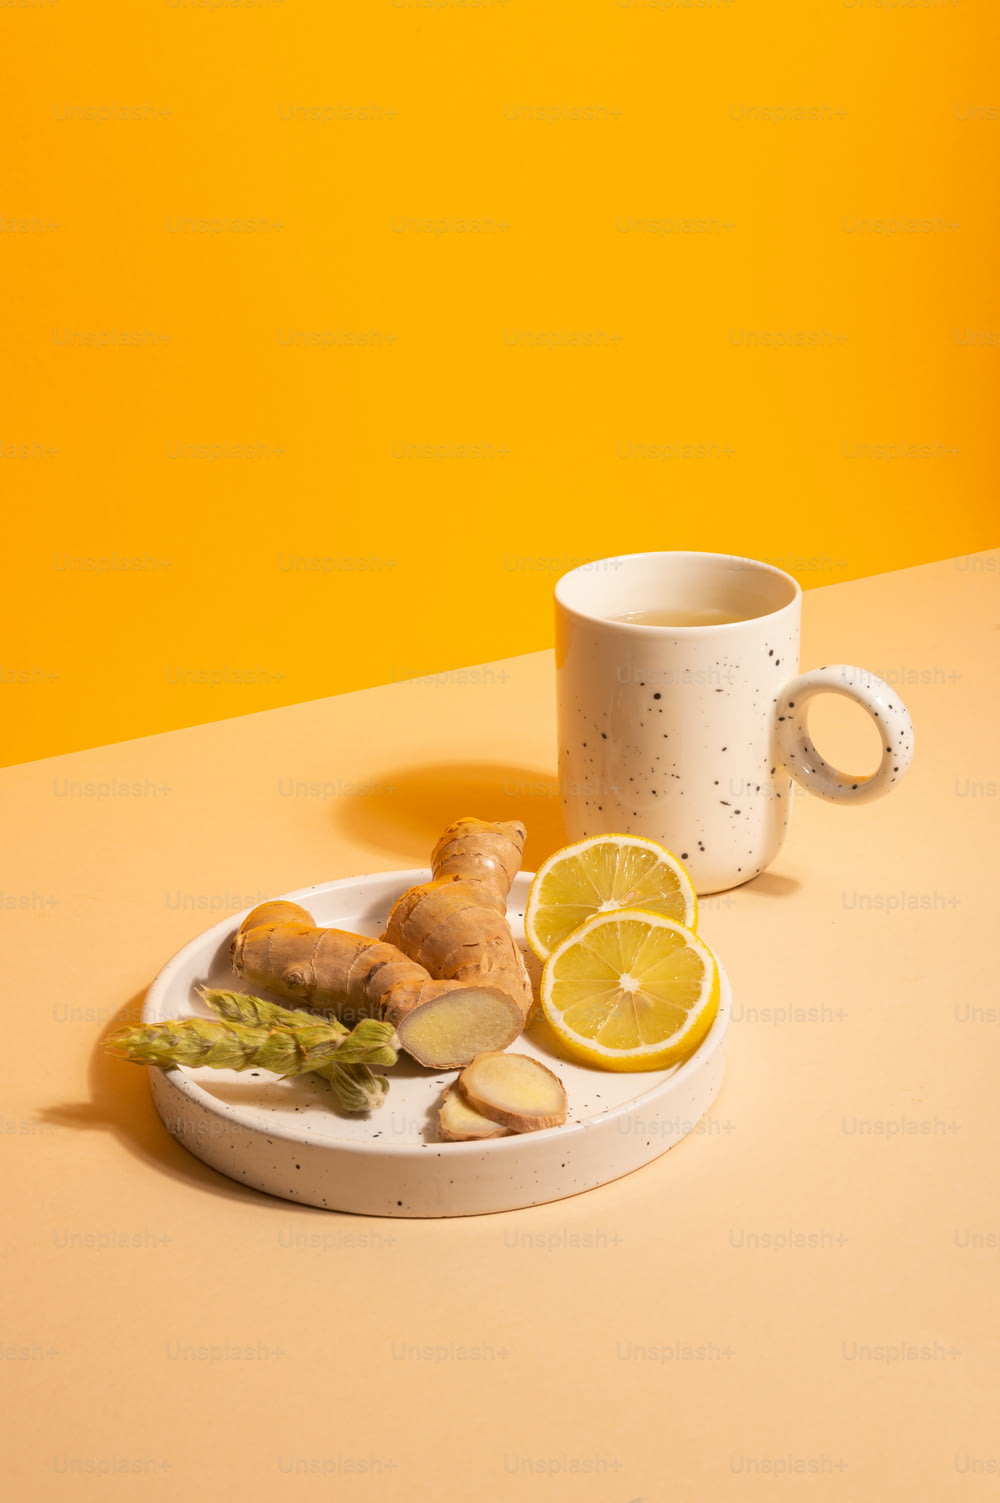 a plate of food and a cup on a table